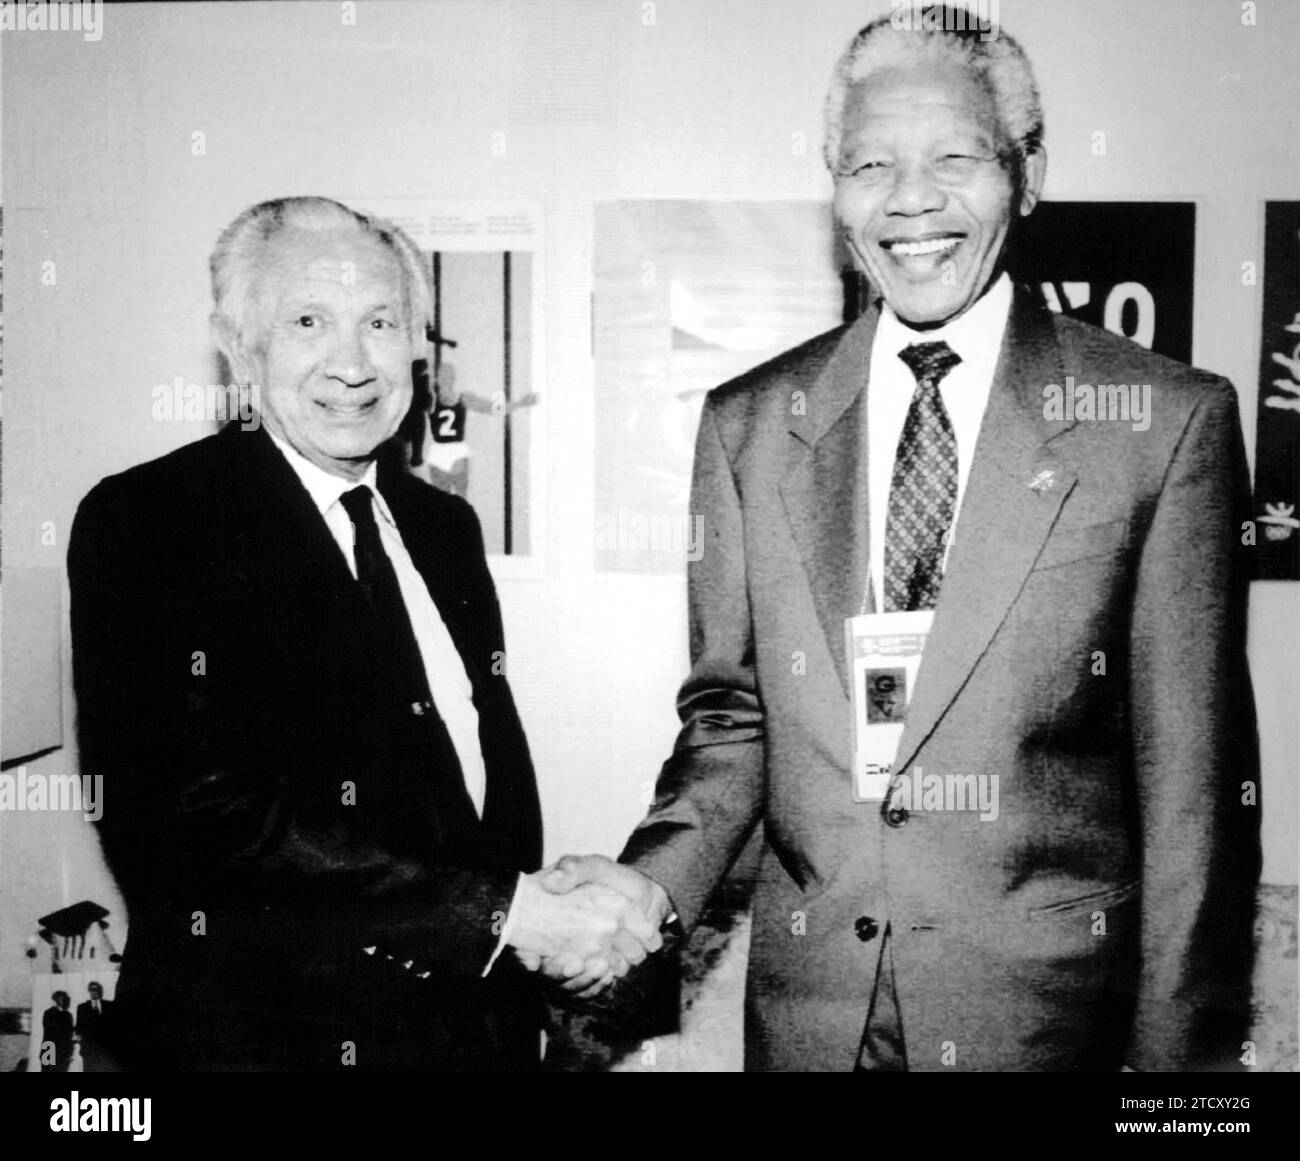 07/23/1992. Juan Antonio Samaranch in an interview with the South African president, Nelson Mandela in Barcelona. Credit: Album / Archivo ABC Stock Photo